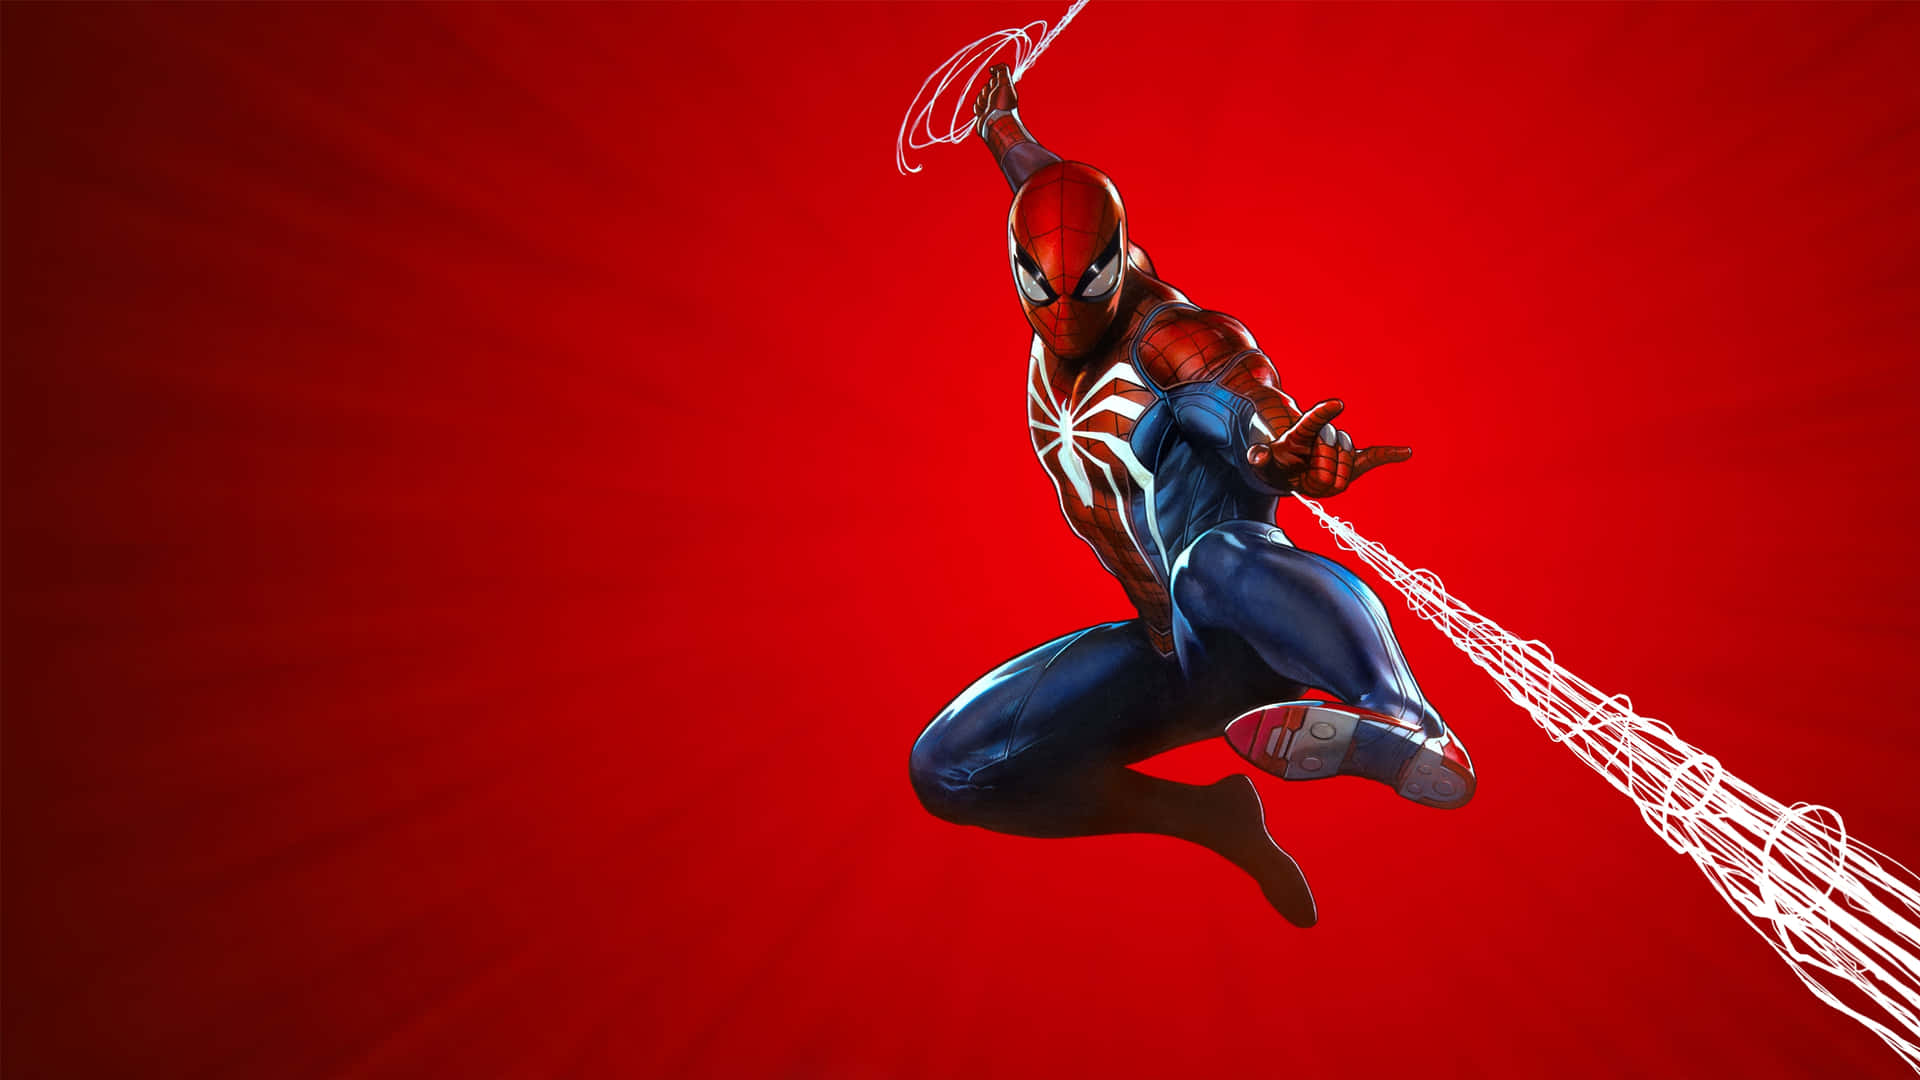 Cool Ps4 Game Character Spider-man With Famous Jump Pose Background